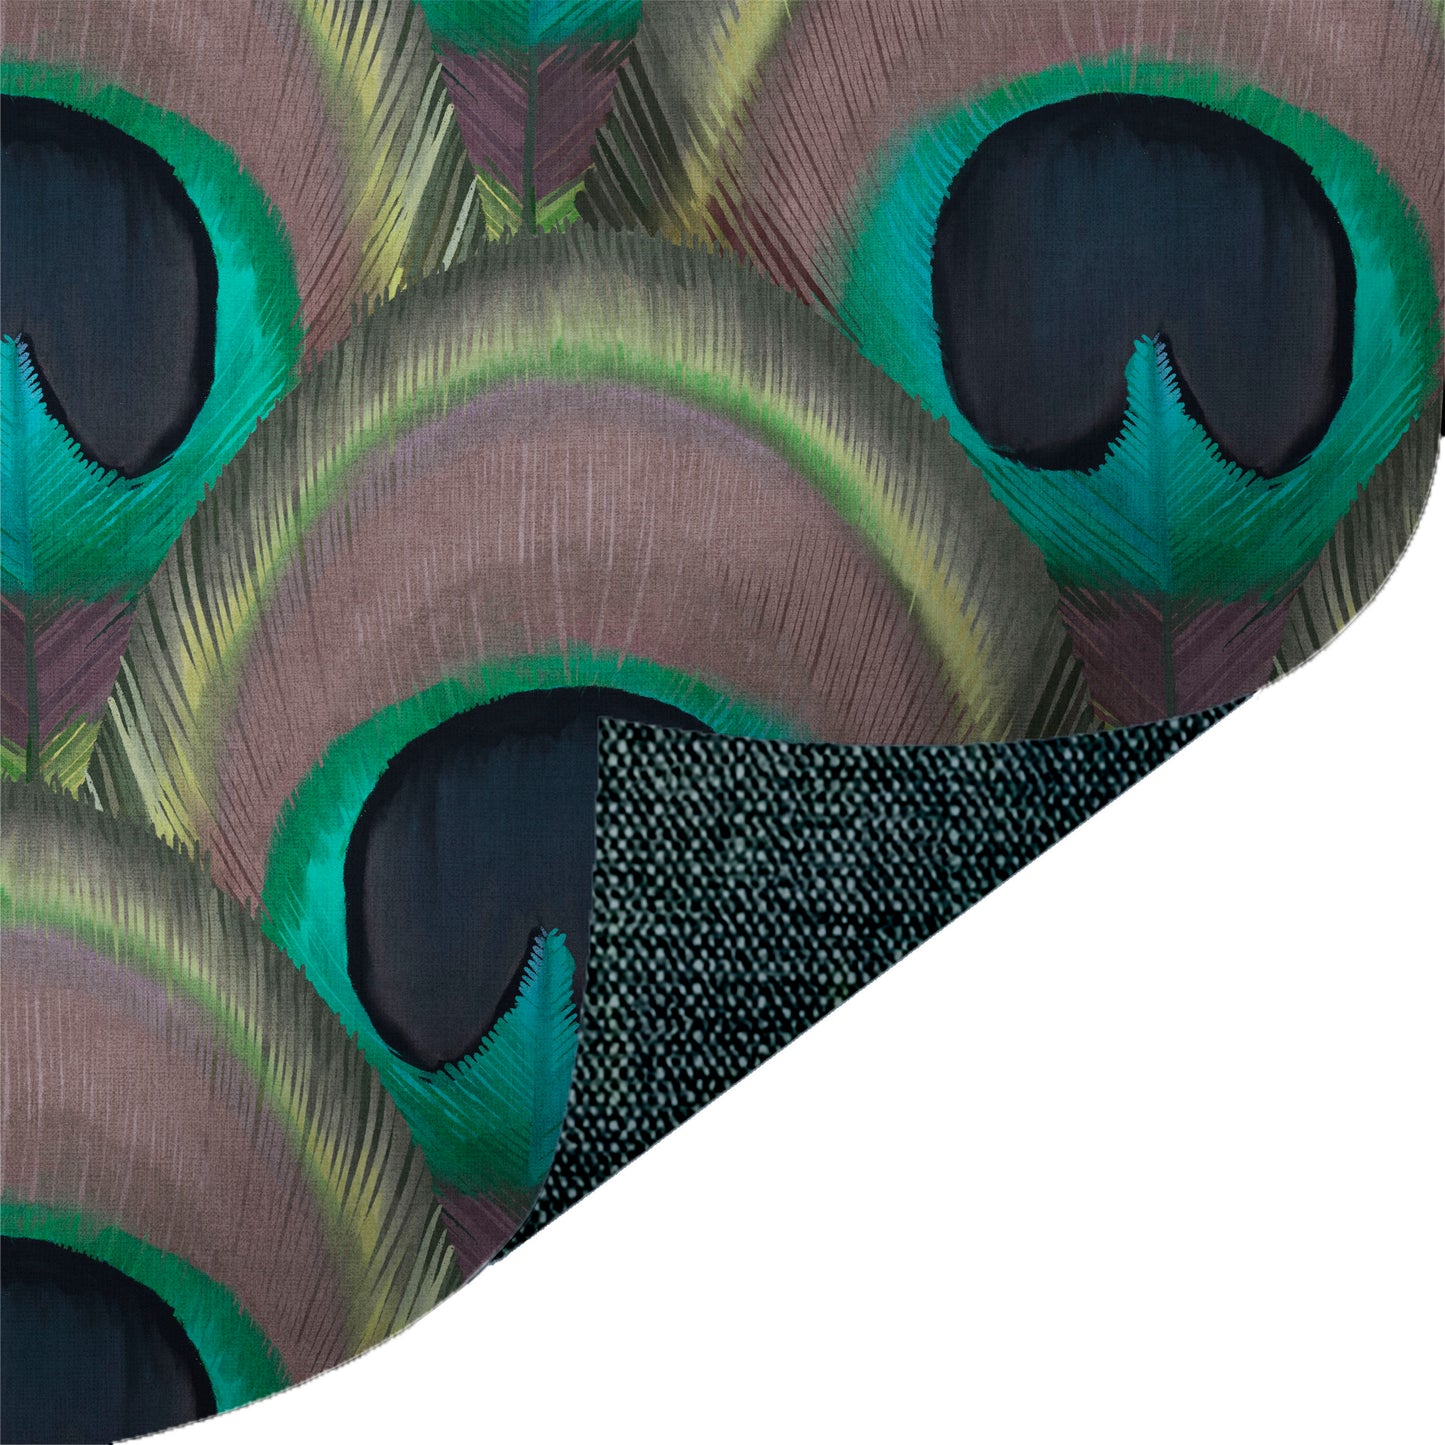 Peacock Feathers Turquoise